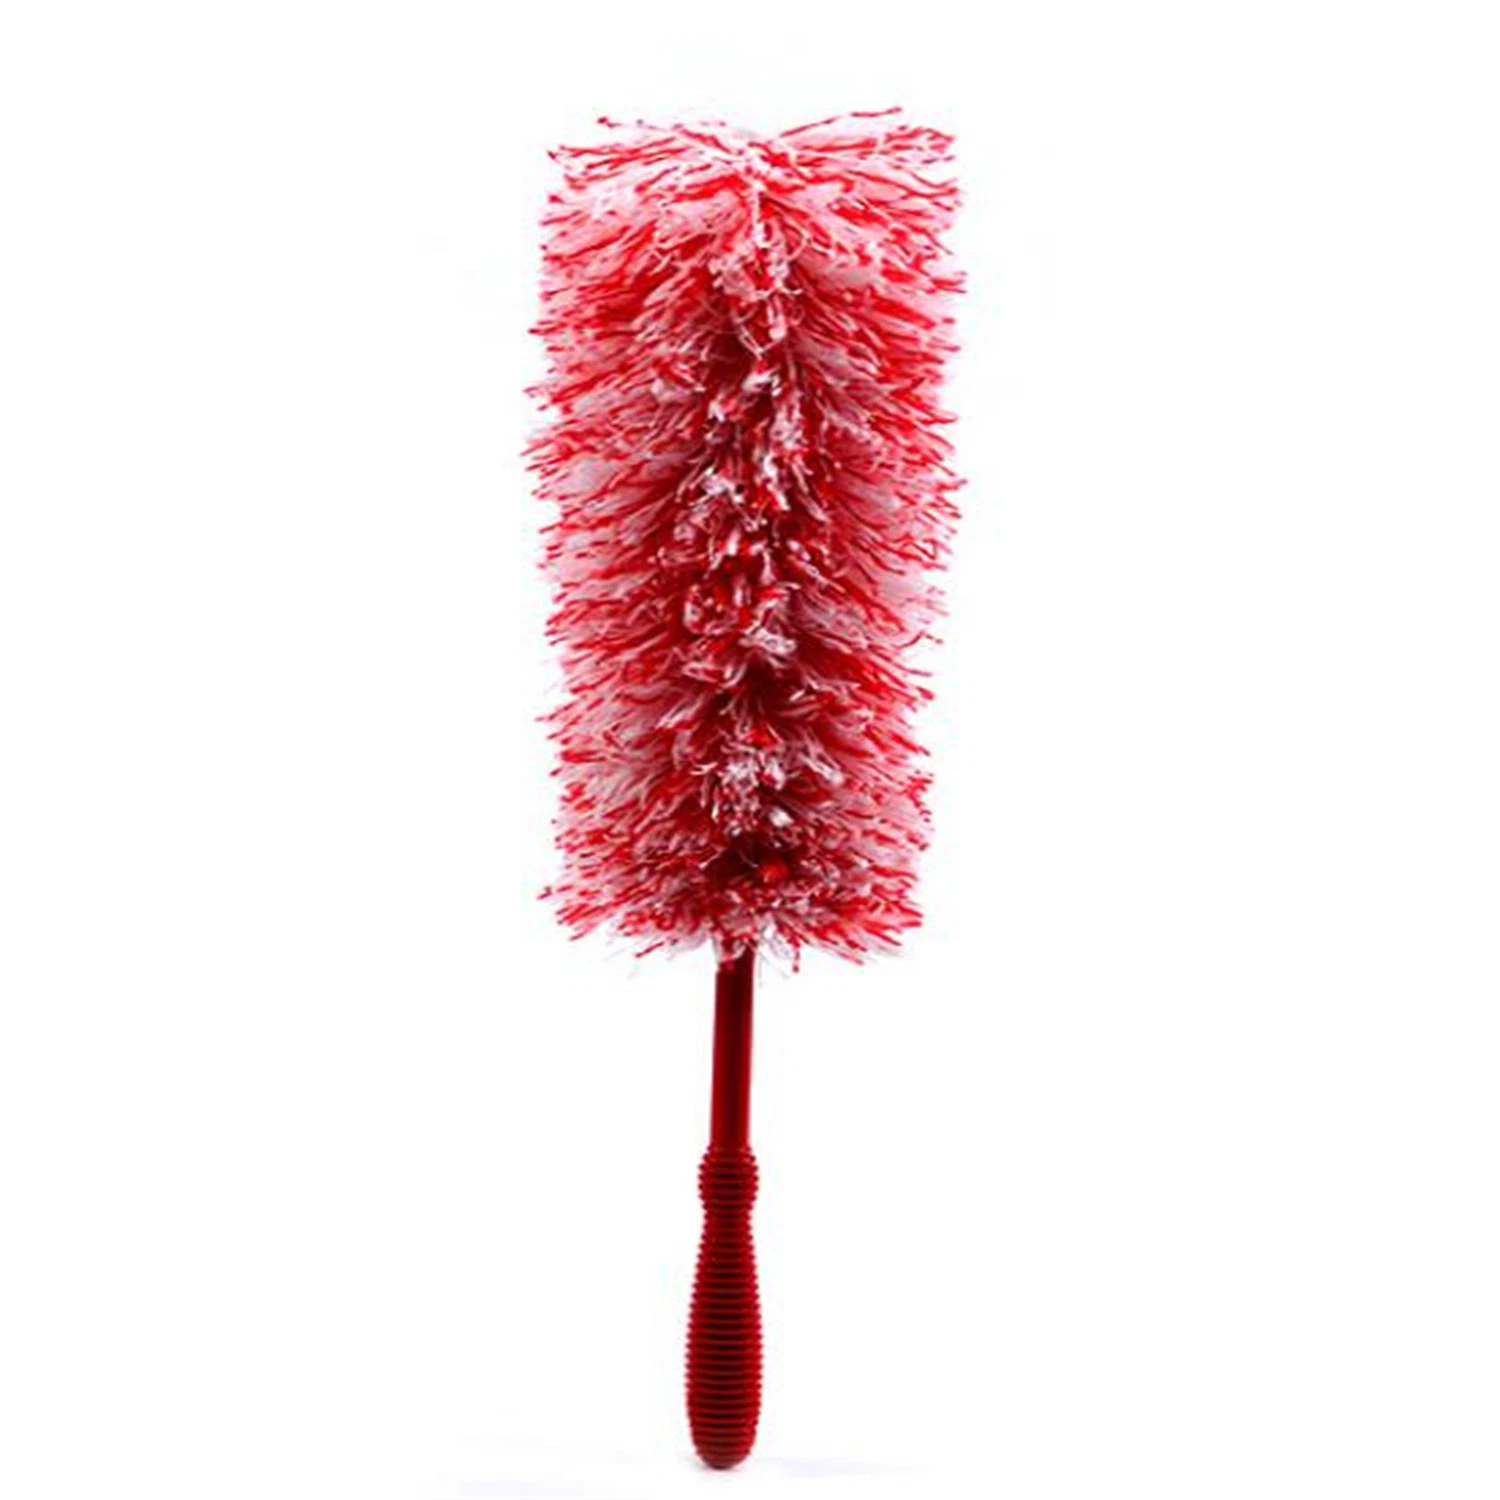 Hot Selling Home Cleaning Dust Magic Microfiber Feather Duster Products